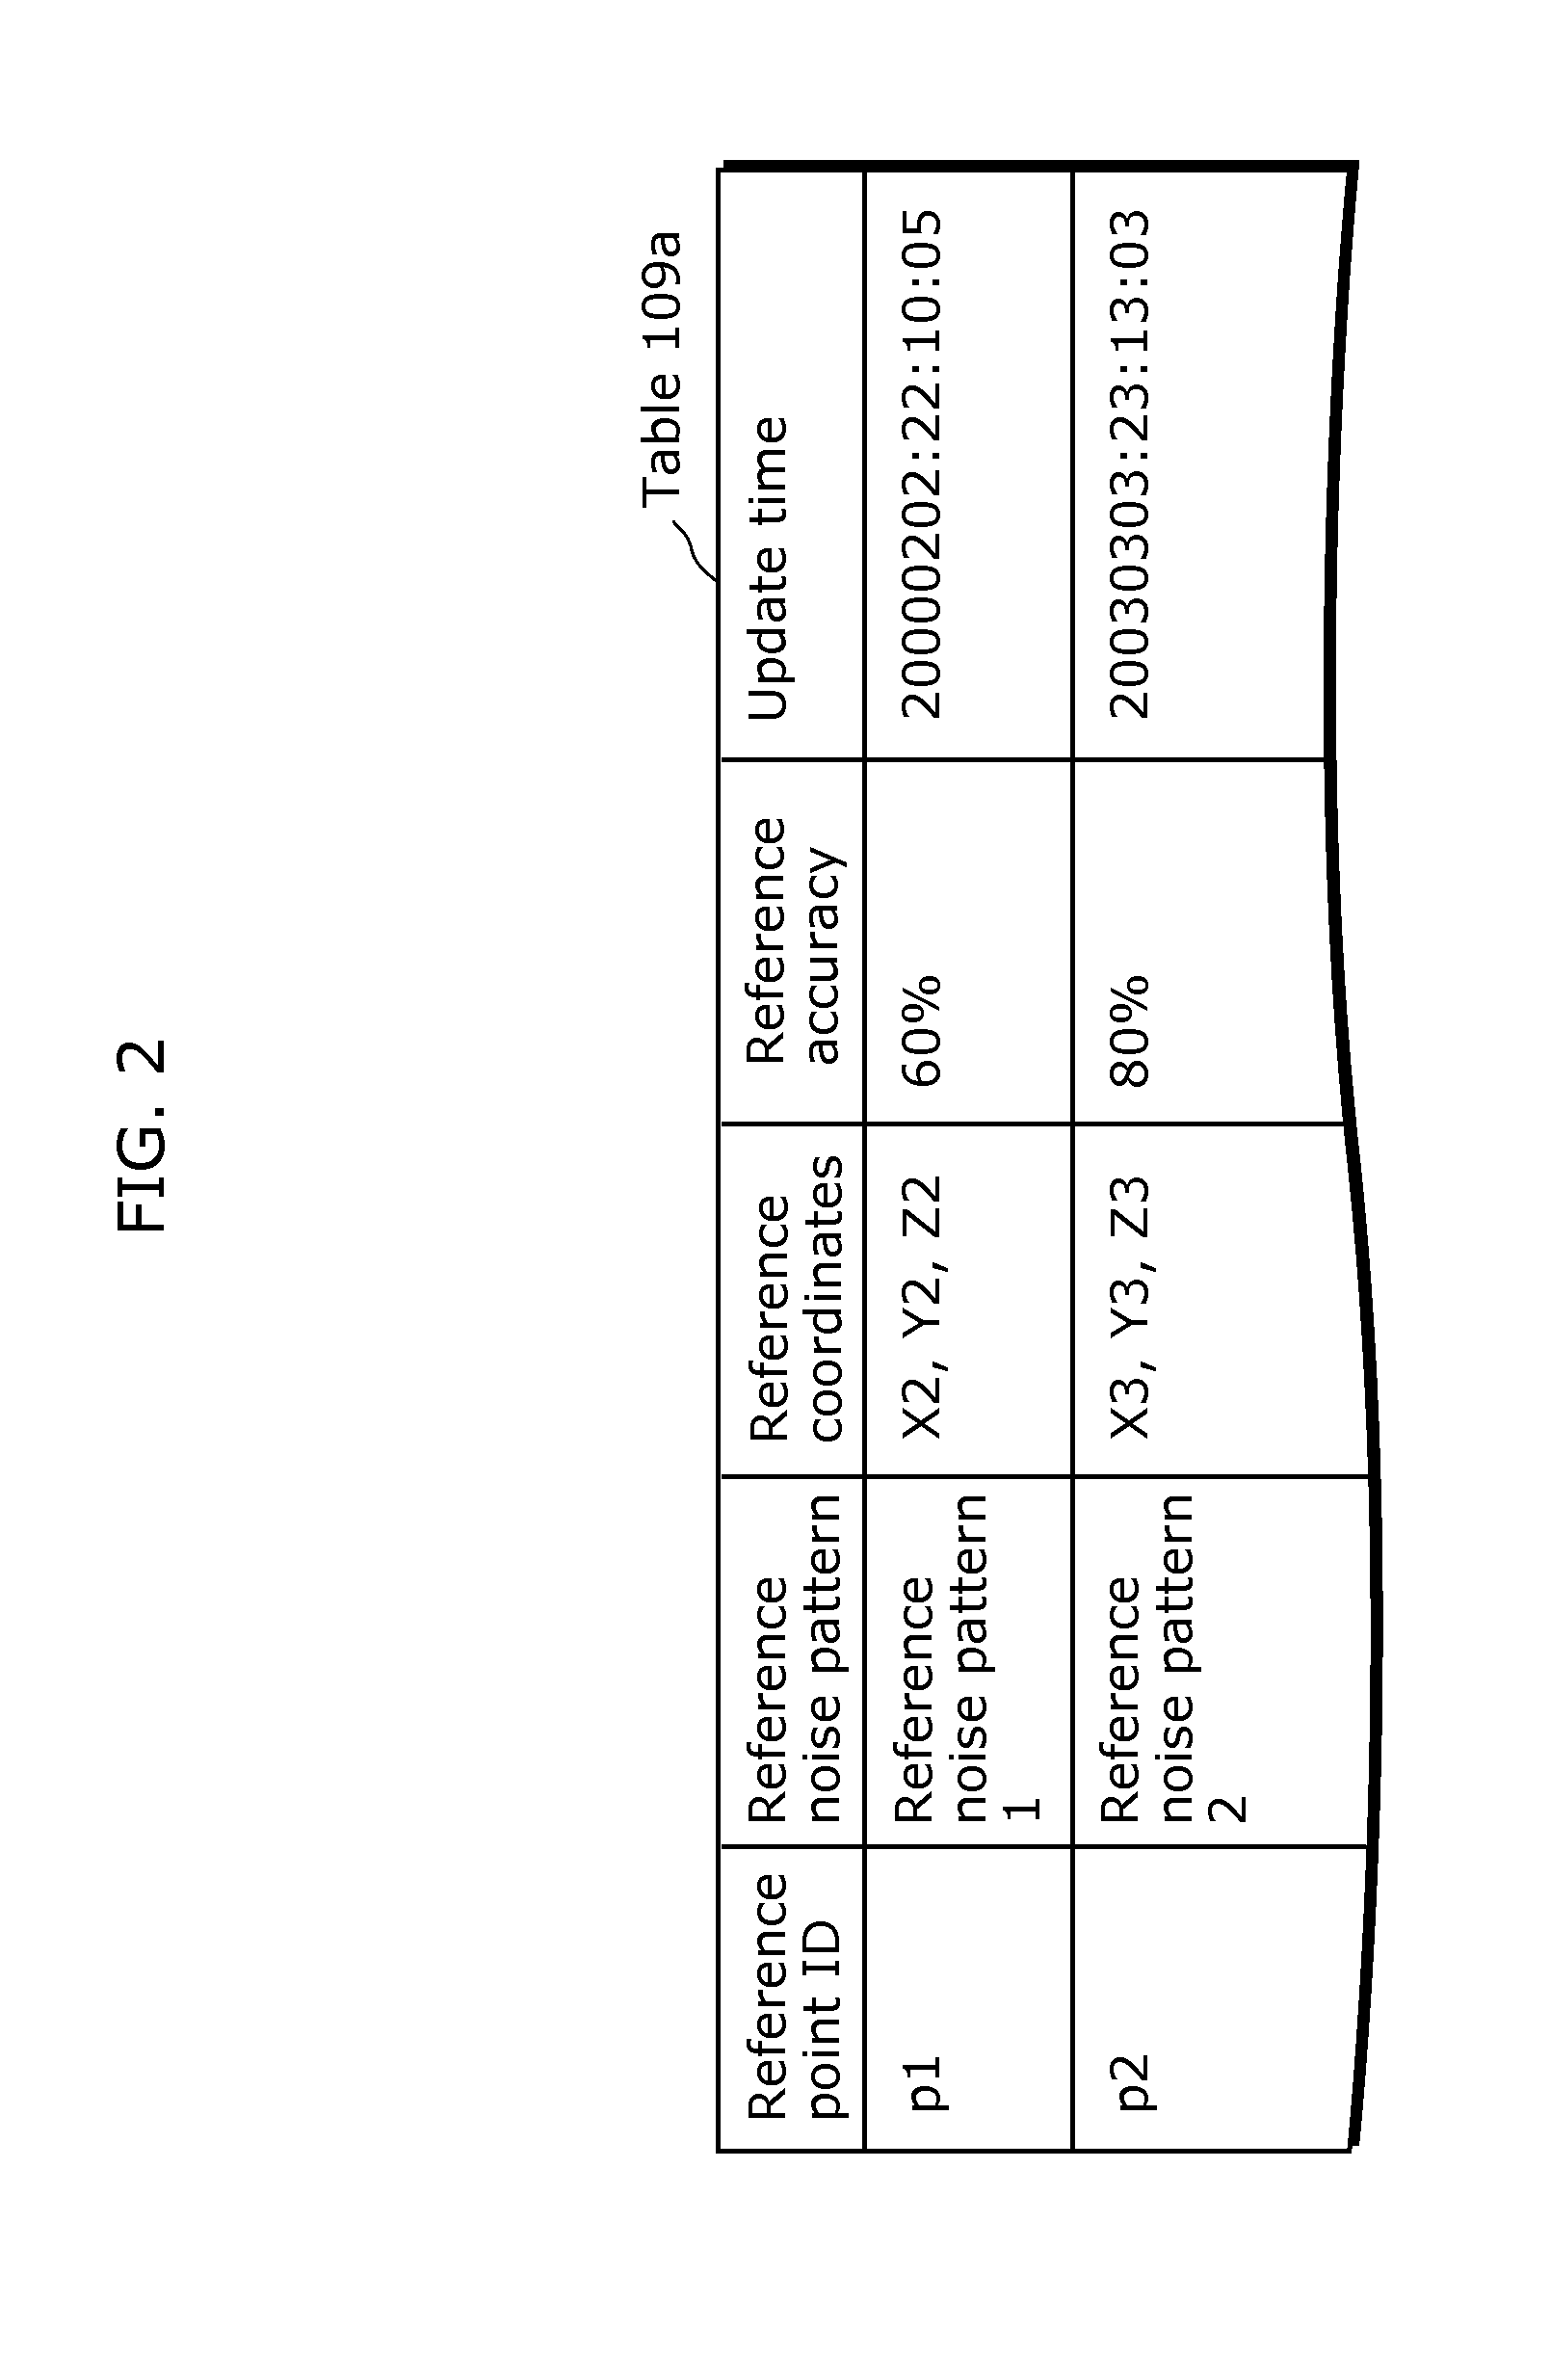 Noise pattern acquisition device and position detection apparatus provided therewith